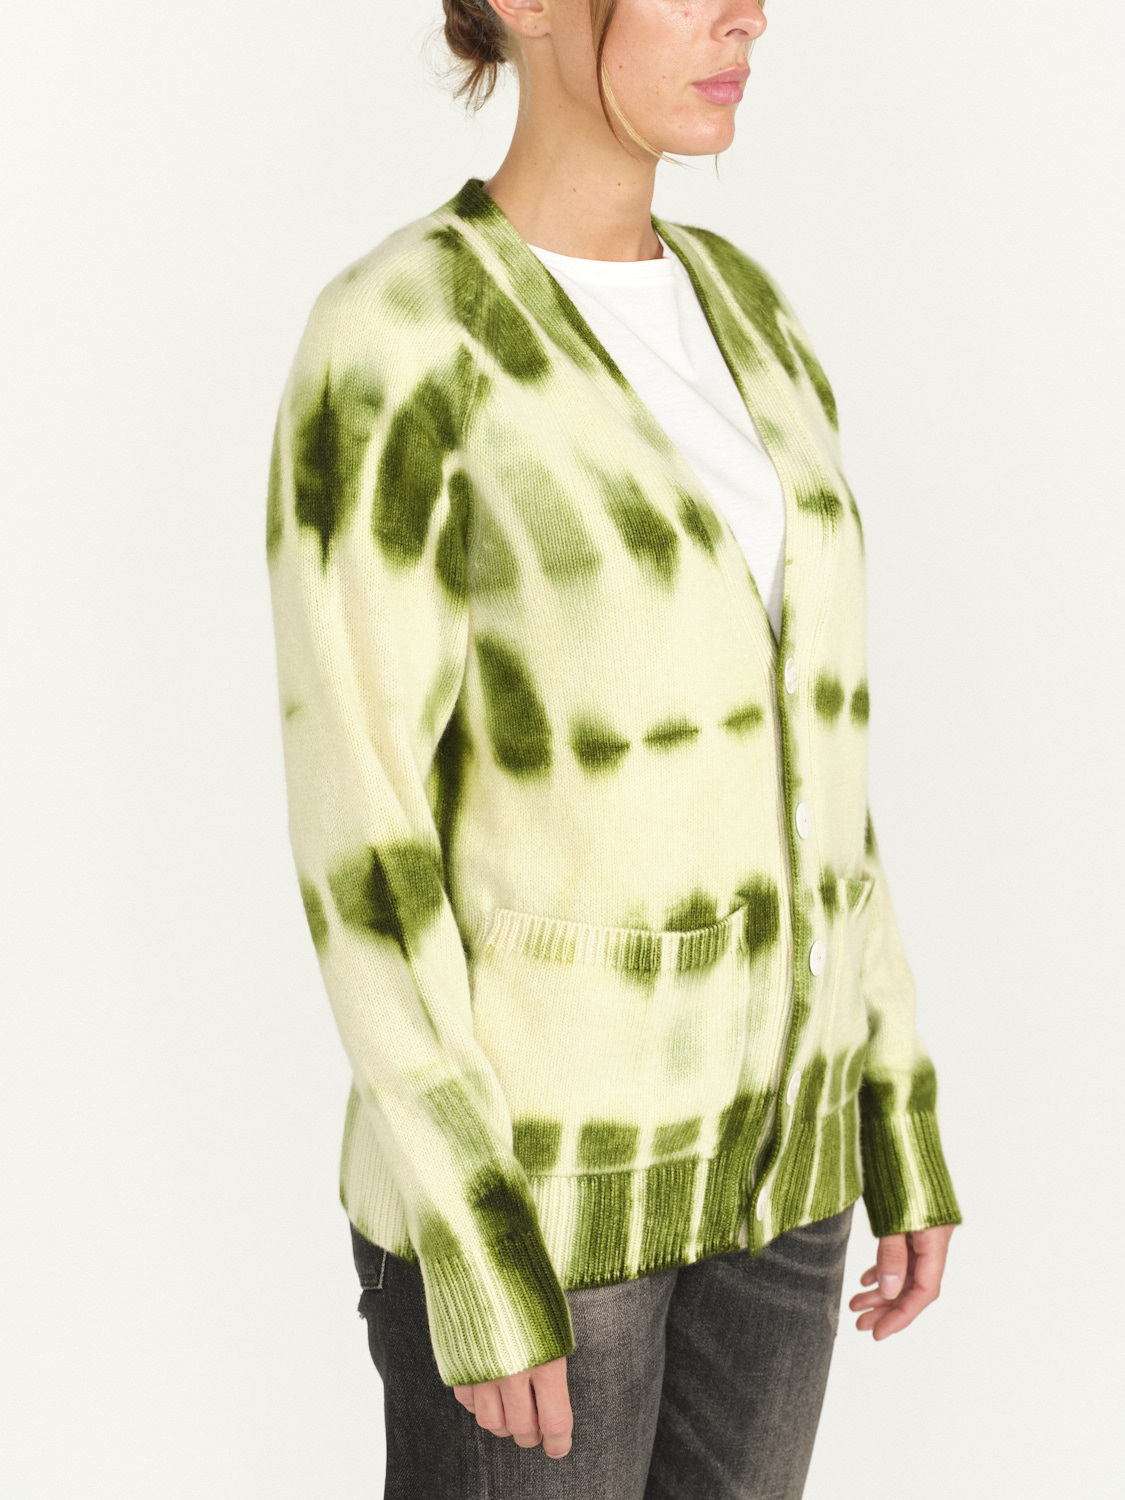 The Elder Statesman Isd Relaxed - Batik pattern cardigan is made of cashmere green S